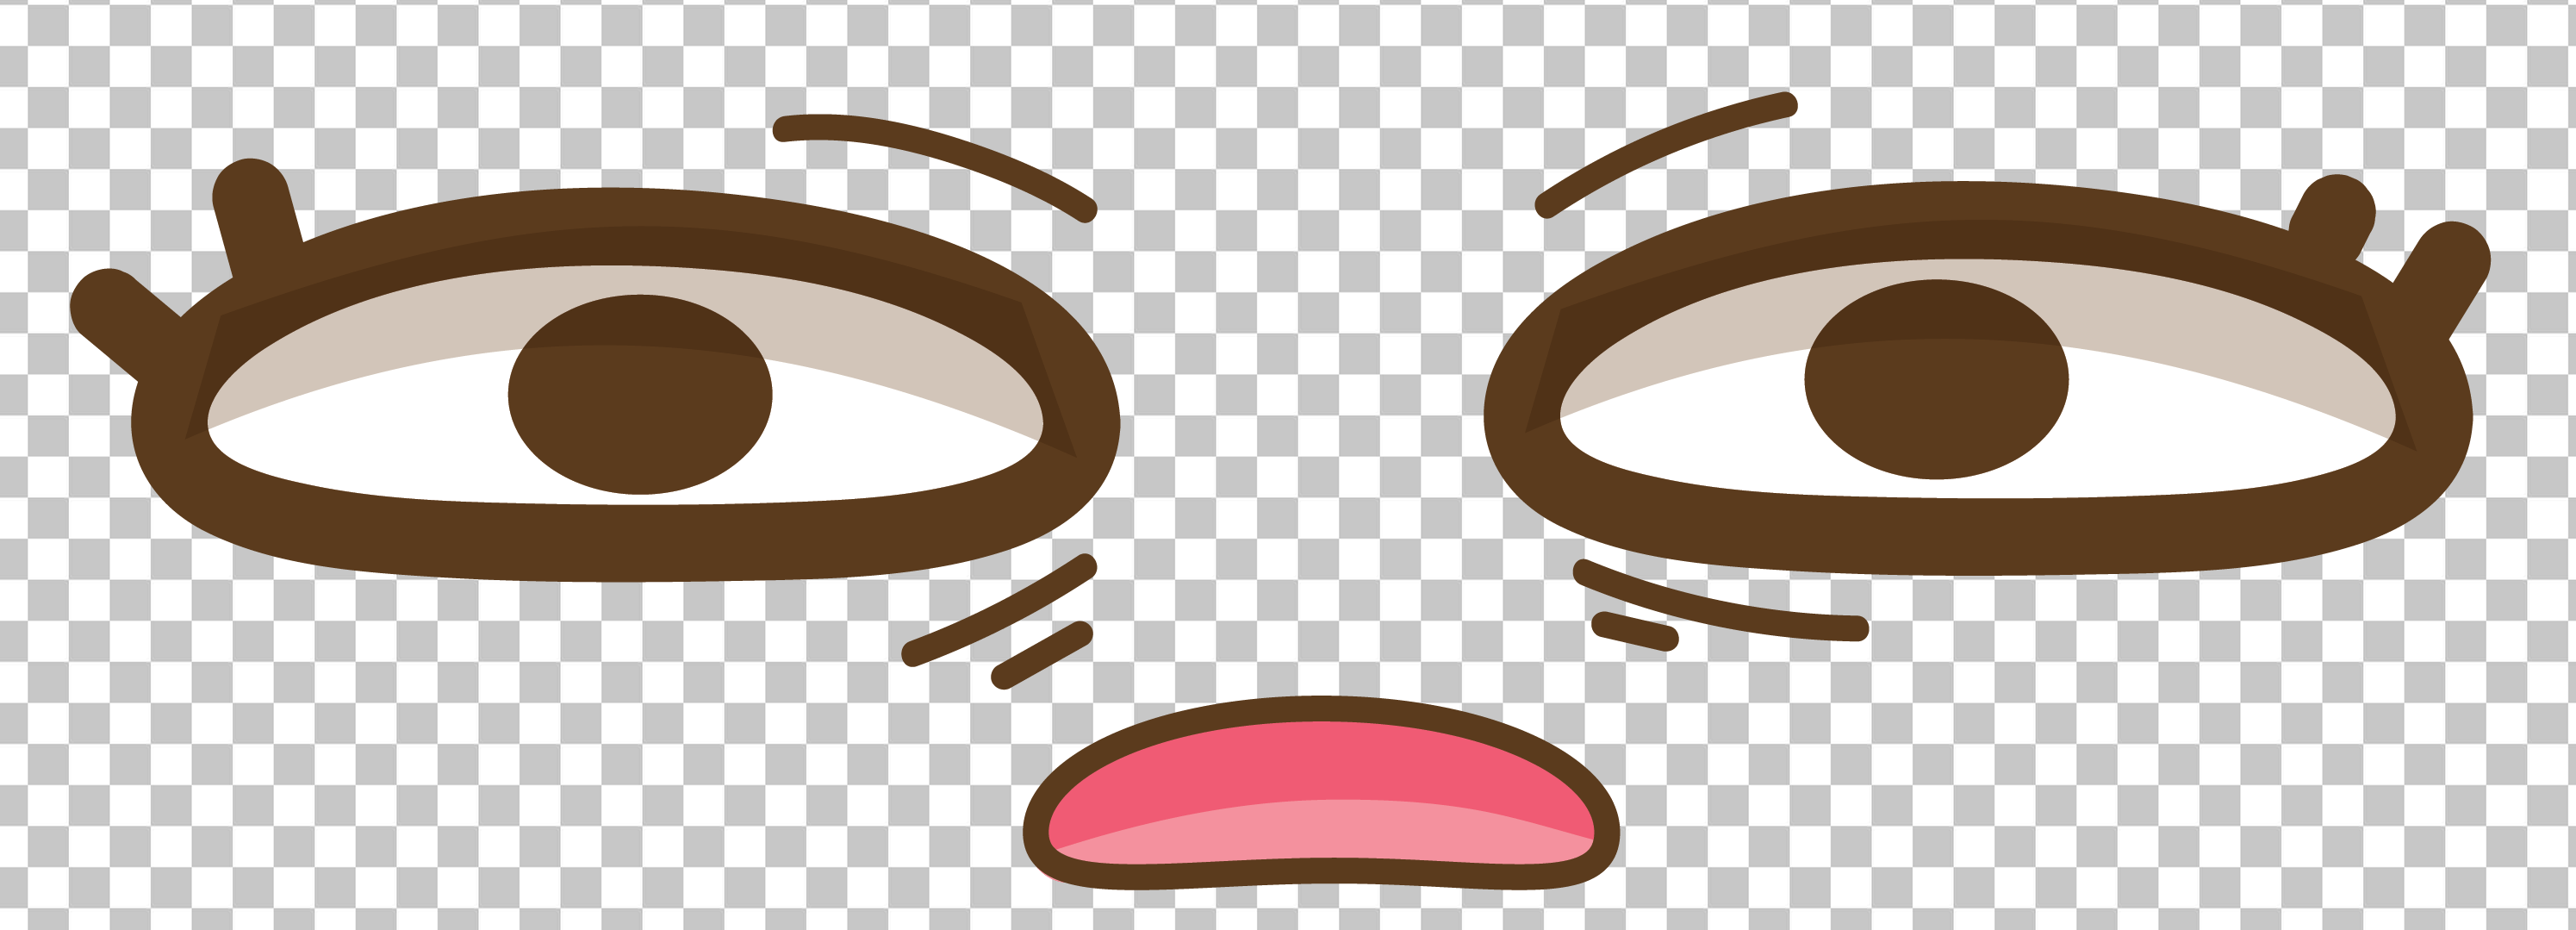 Shock and Surprise with the "Couldn't Believe" Expression PNG Image